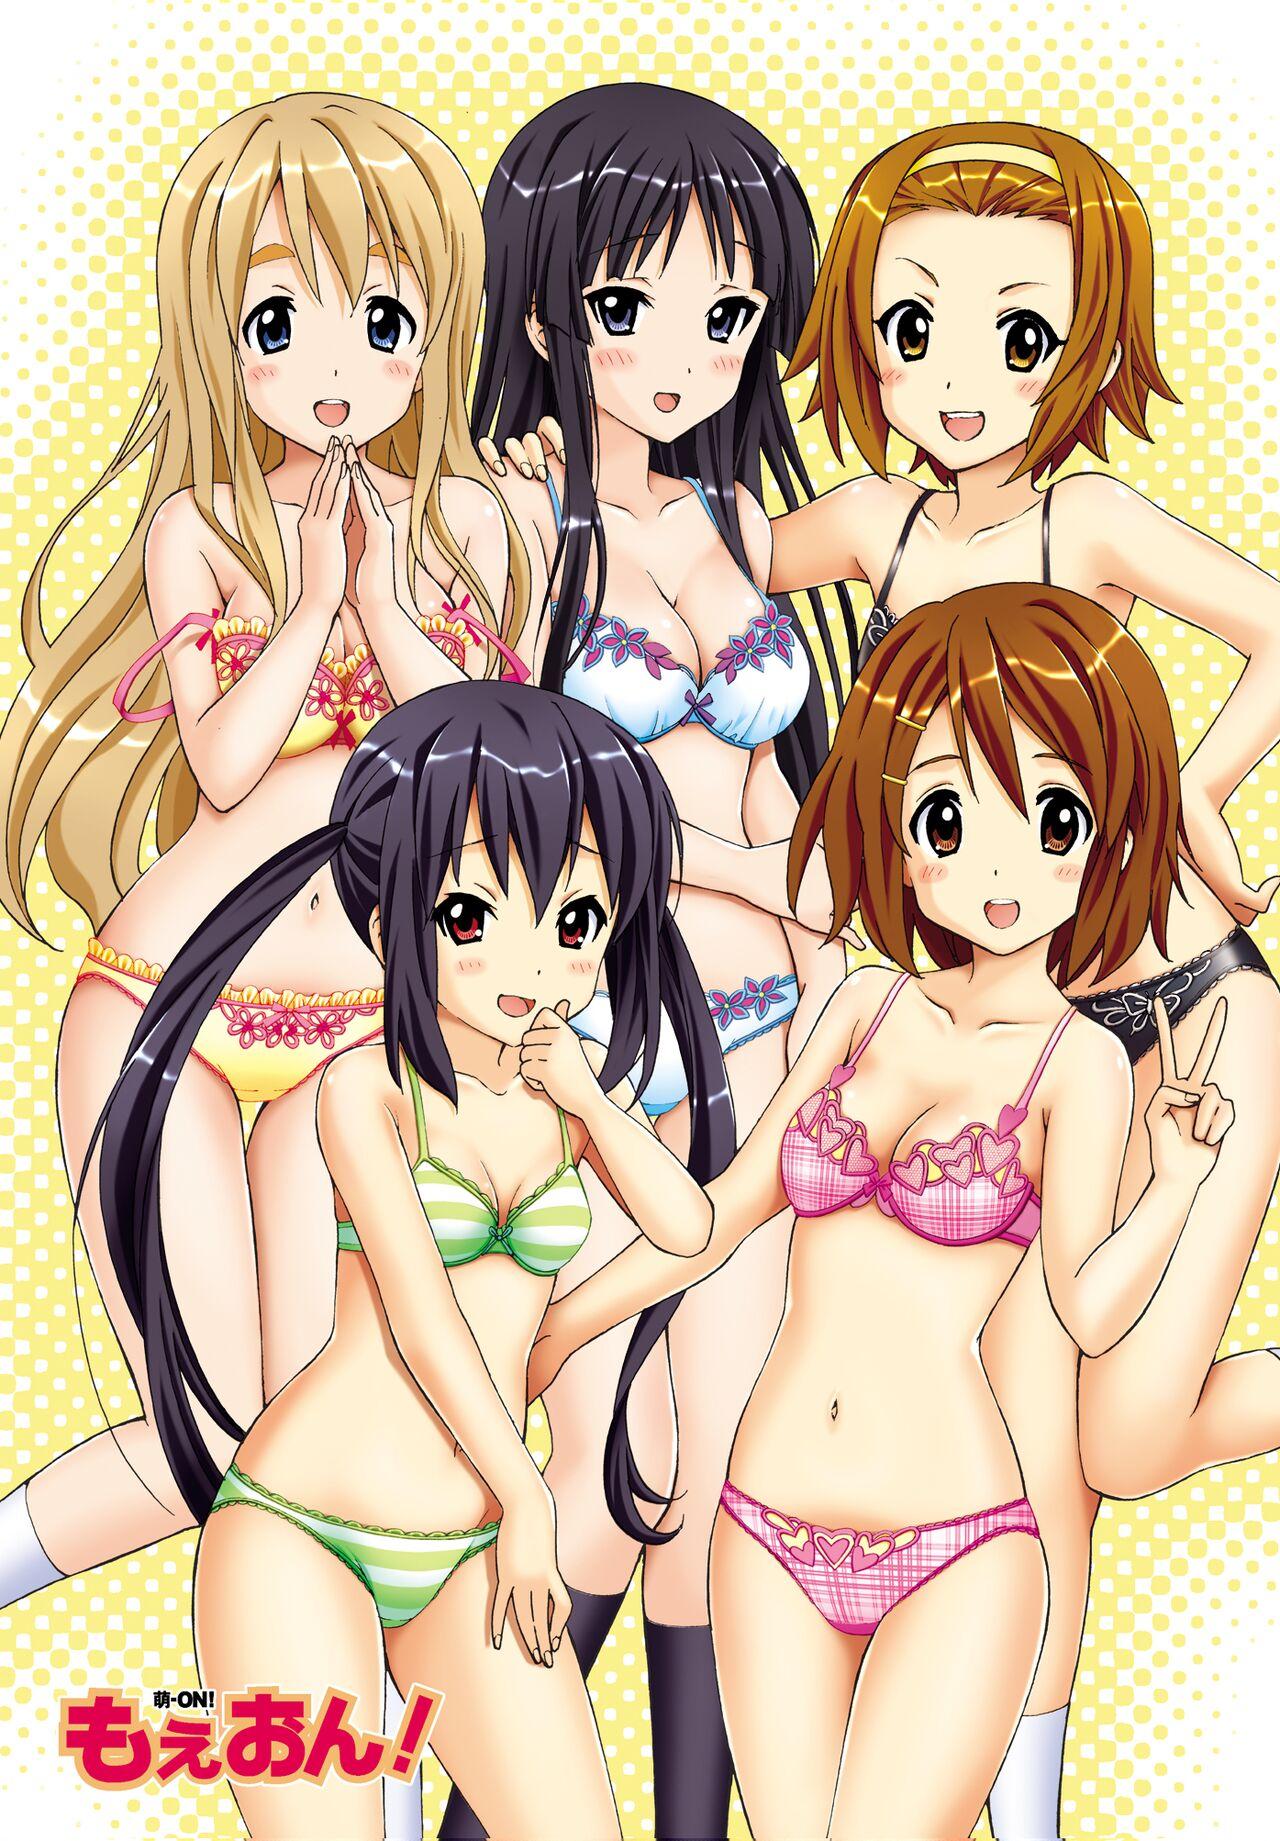 Indonesian Moe-on - K-on Sexteen - Picture 3